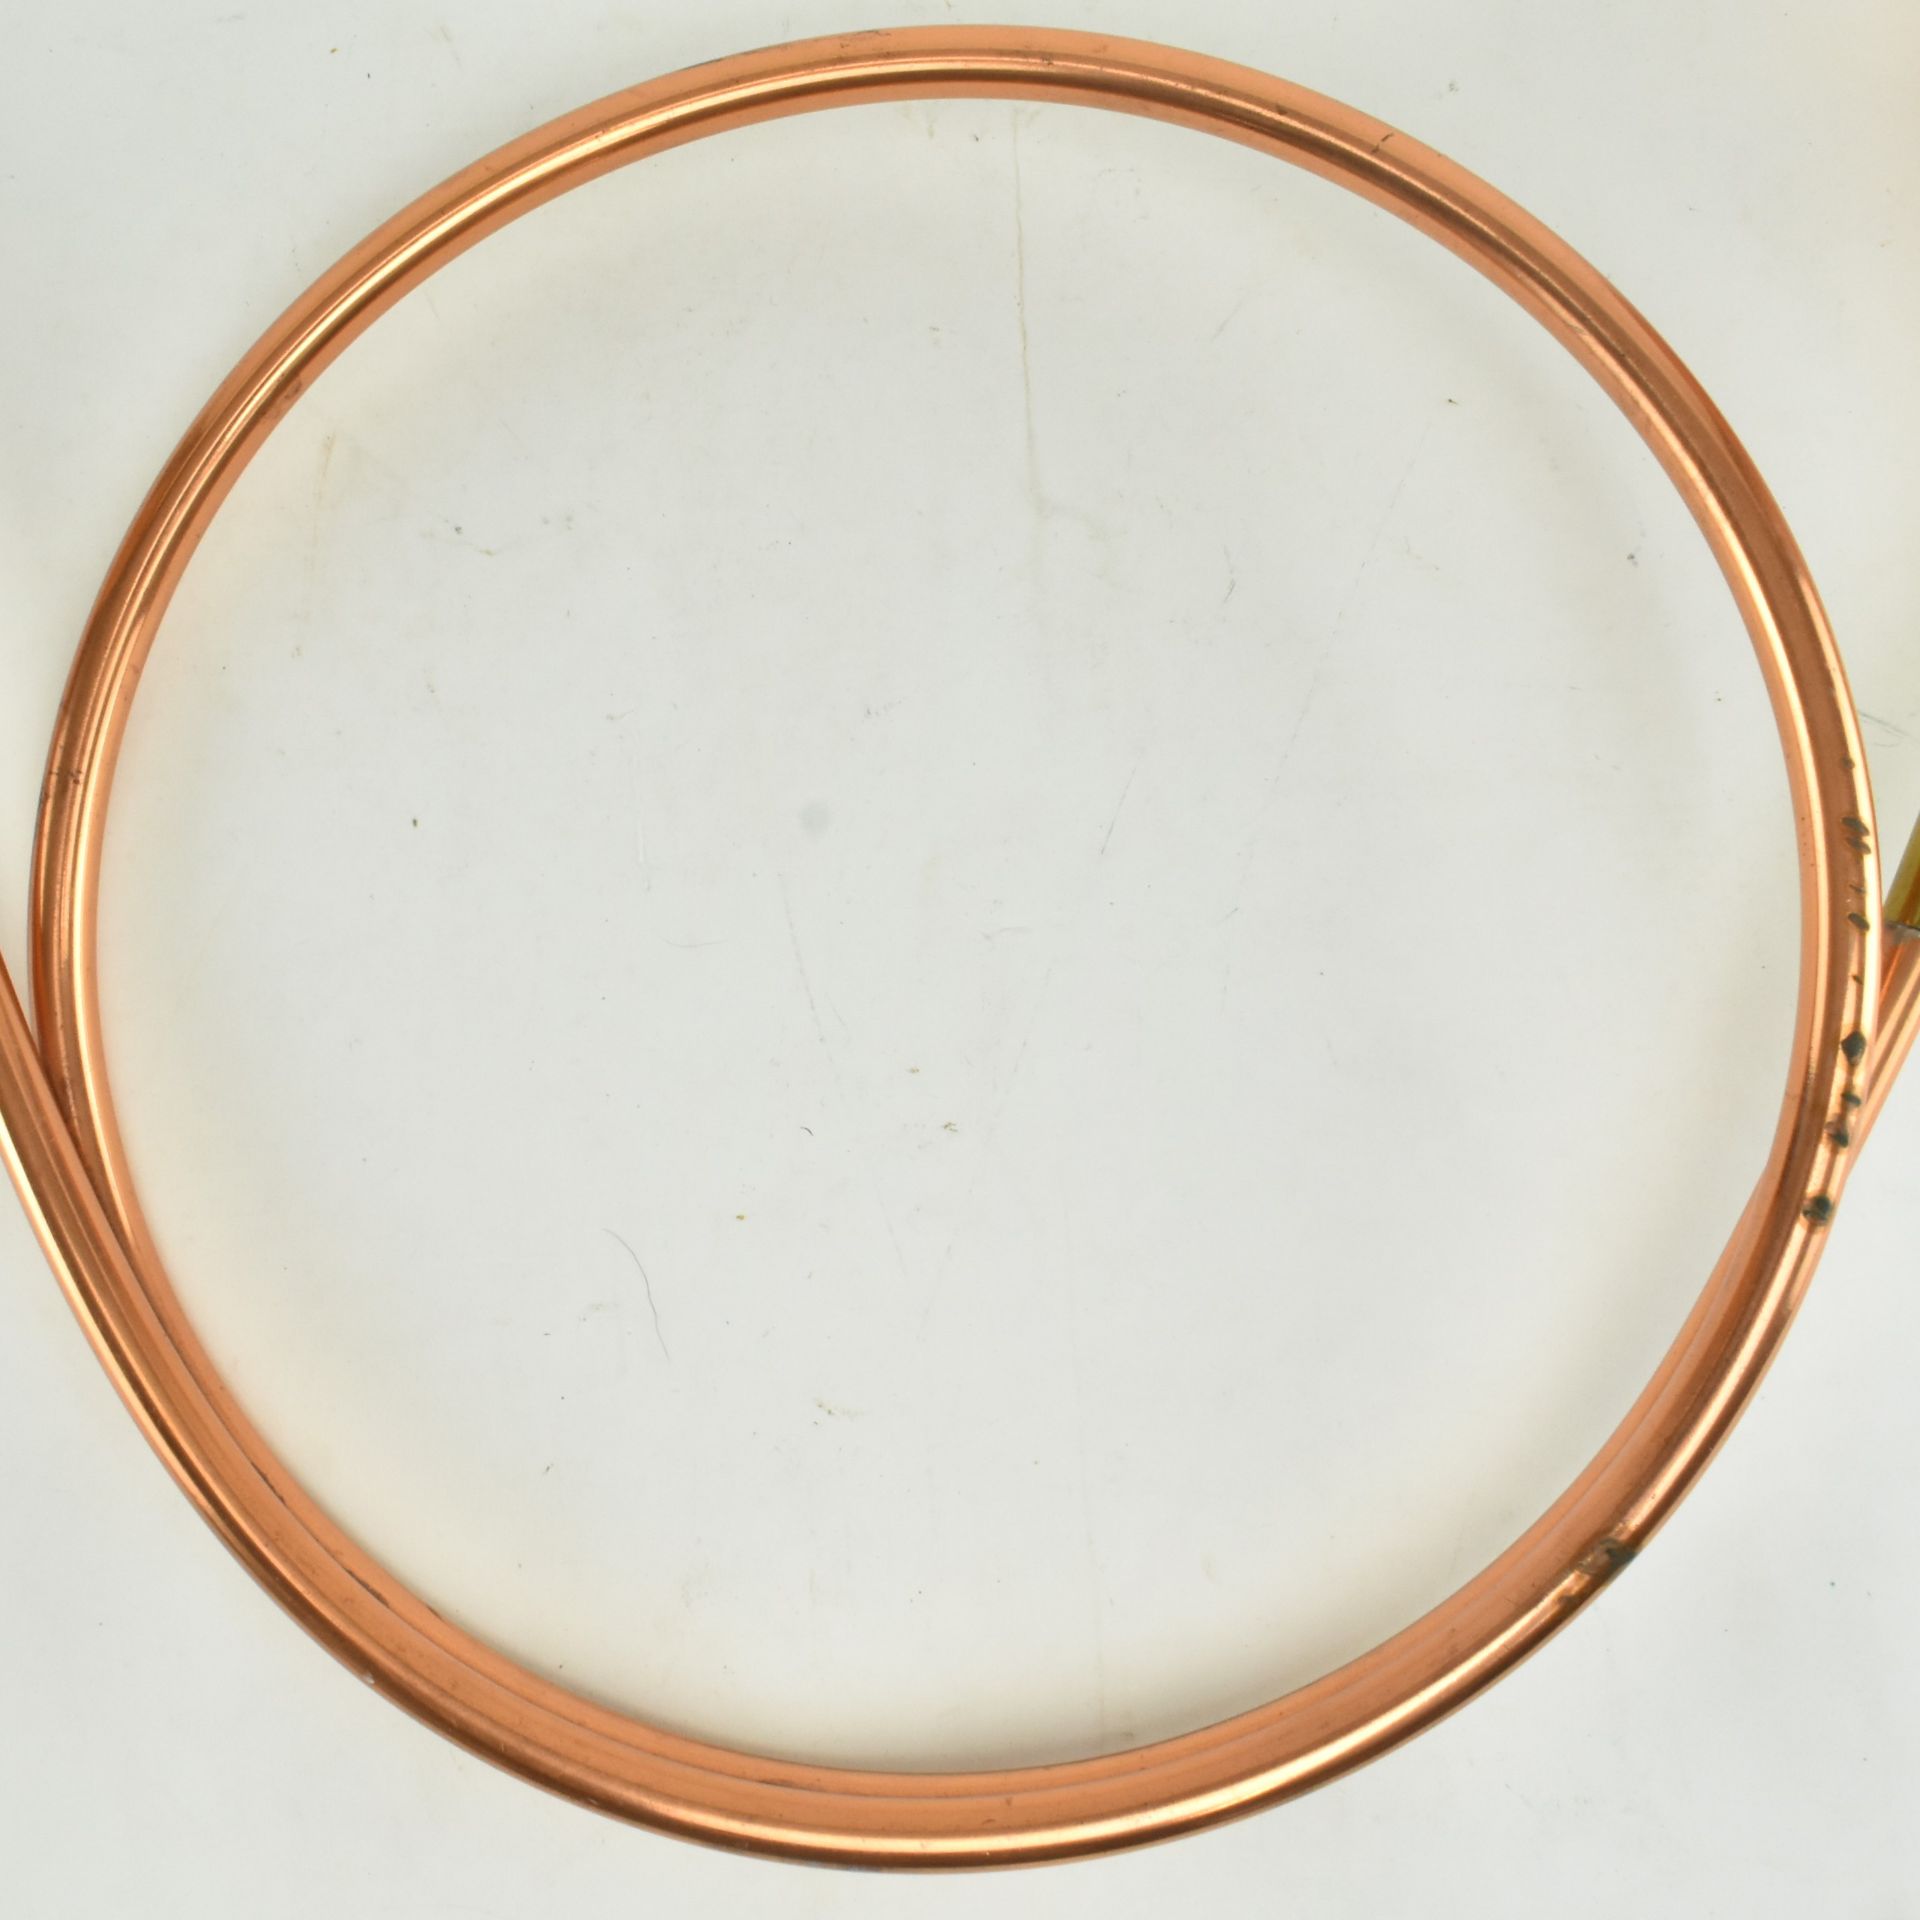 EARLY 20TH CENTURY COPPER & BRASS HUNTING HORN - Image 3 of 6